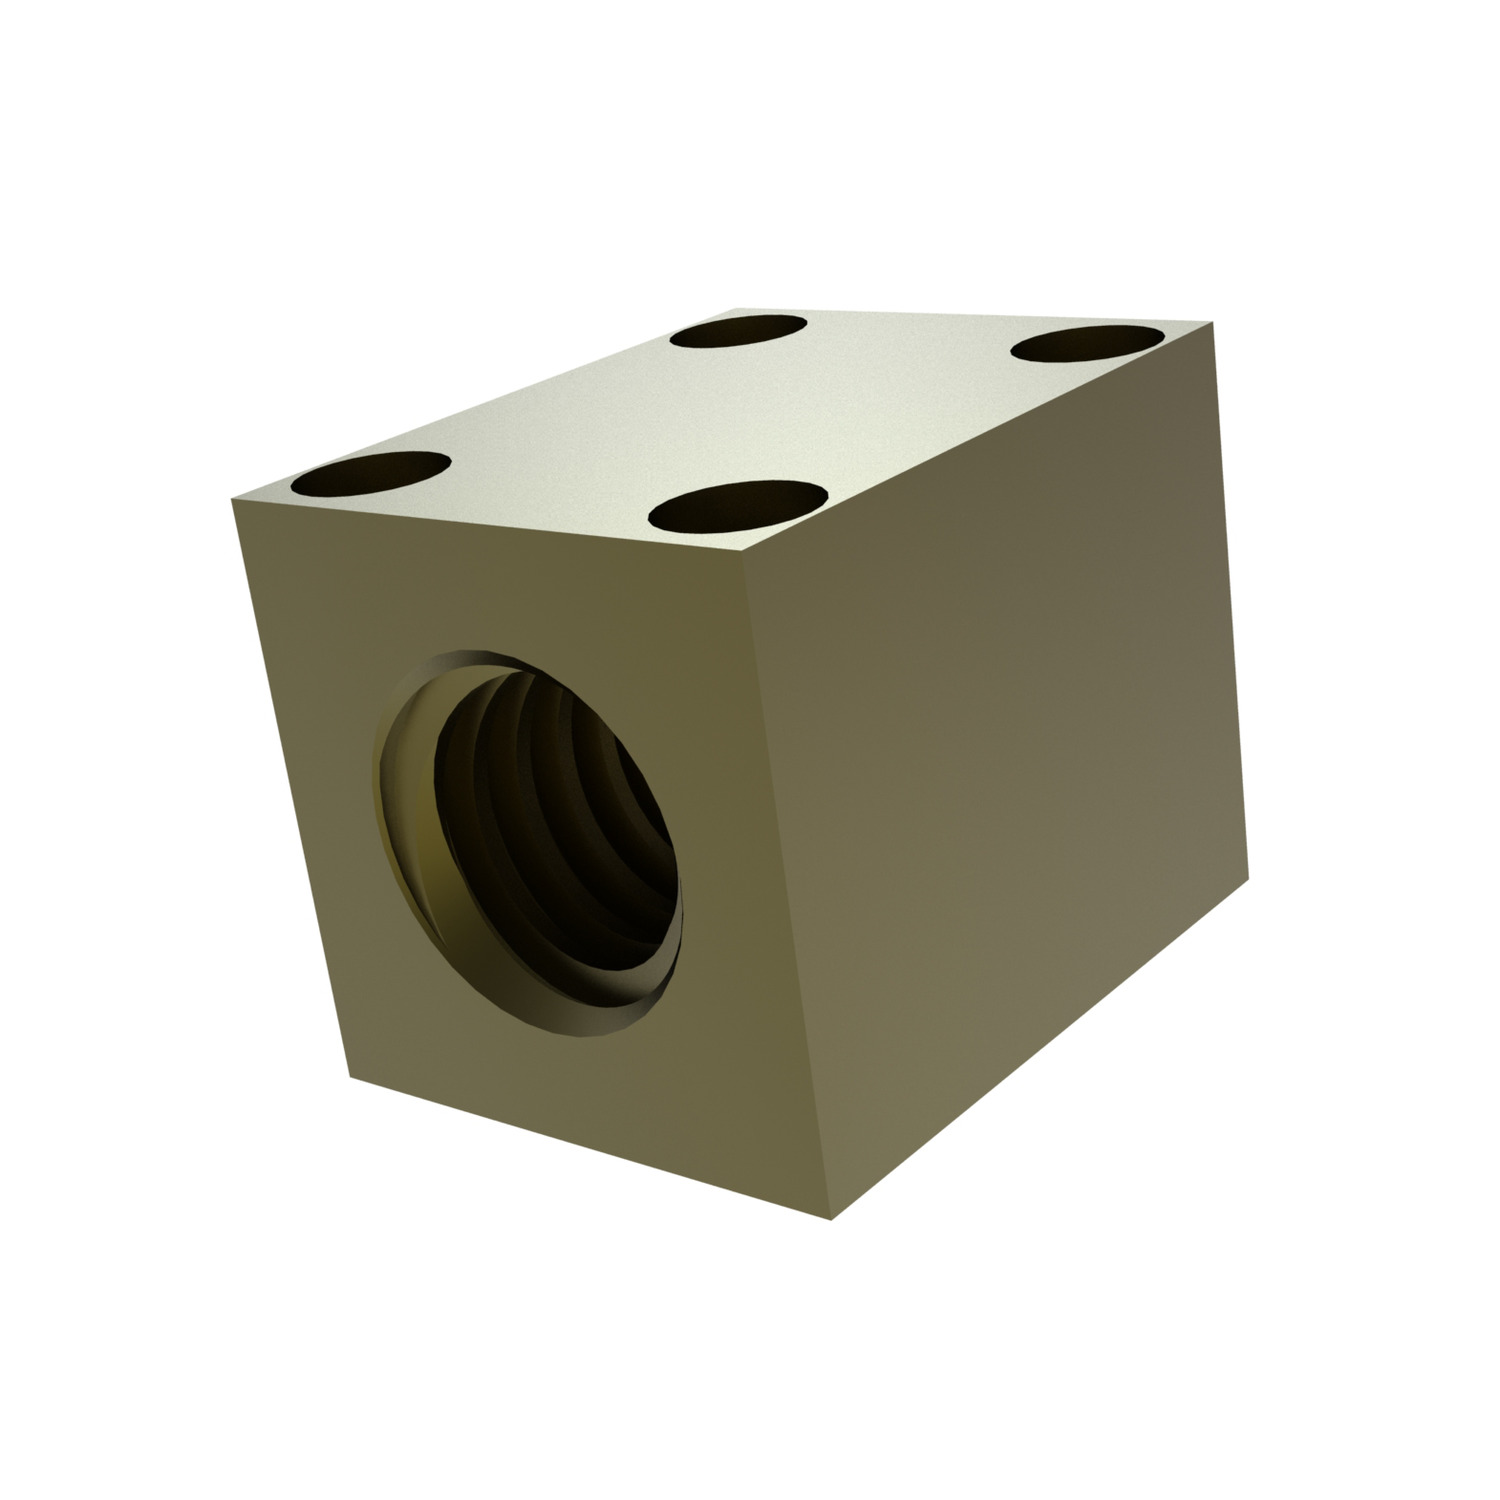 Square Bronze Nut with Through Holes Square bronze lead screws nuts - for trapezoidal threads.